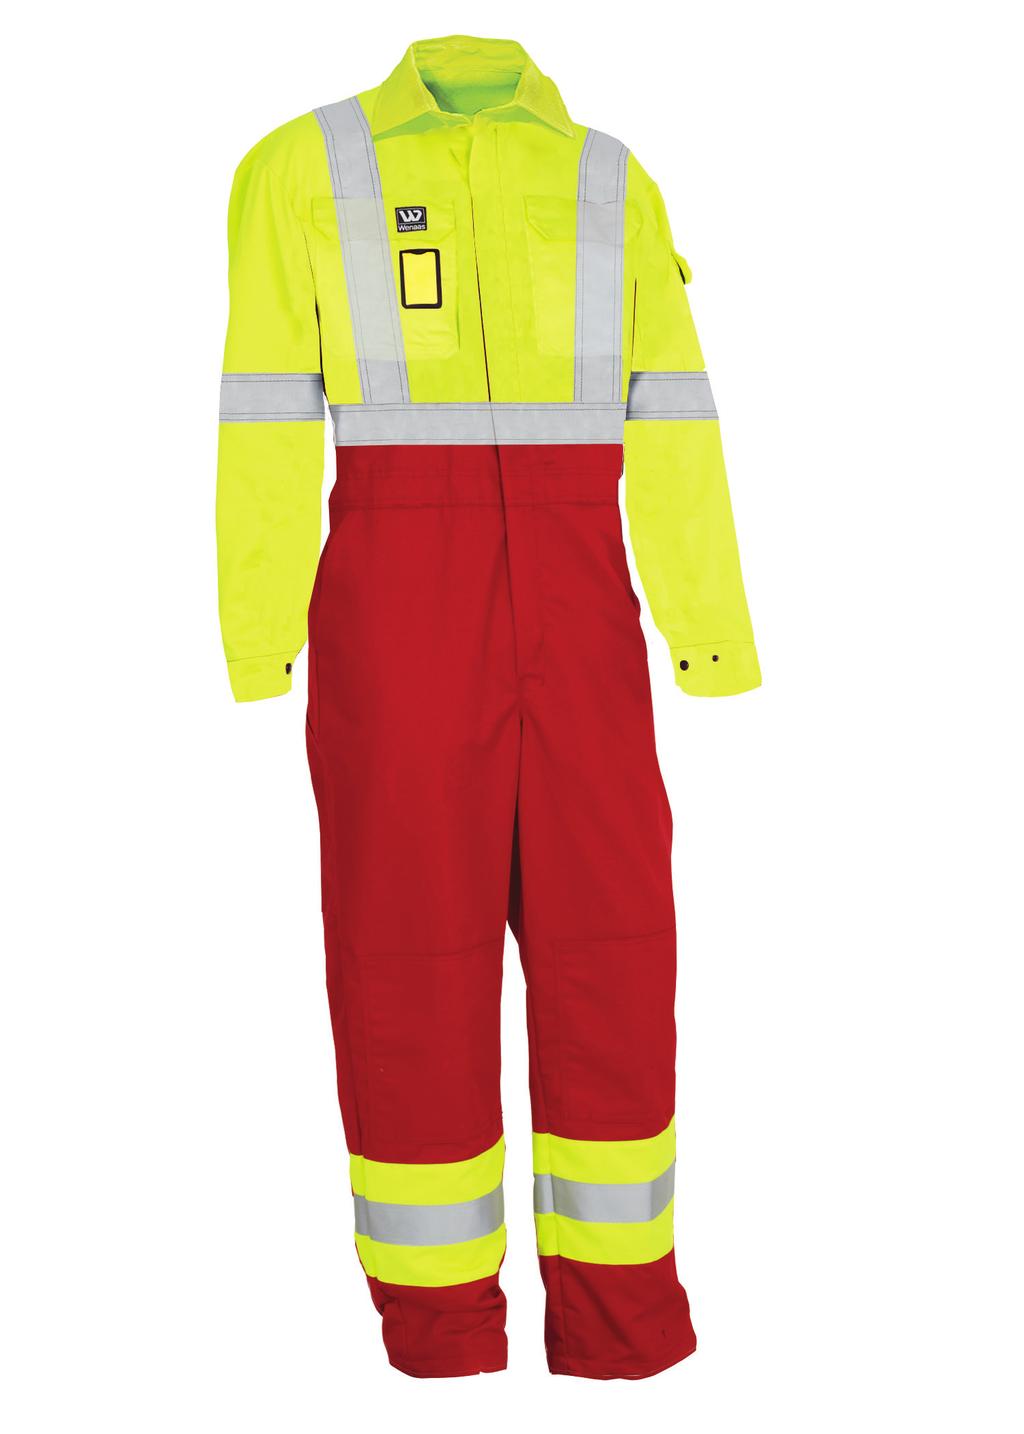 CSA COMPLIANT HIVIS + FR WENAAS OFFSHORE DALETEC FR COVERALL Model No. 0-87865-1024-8032 Coming Soon!